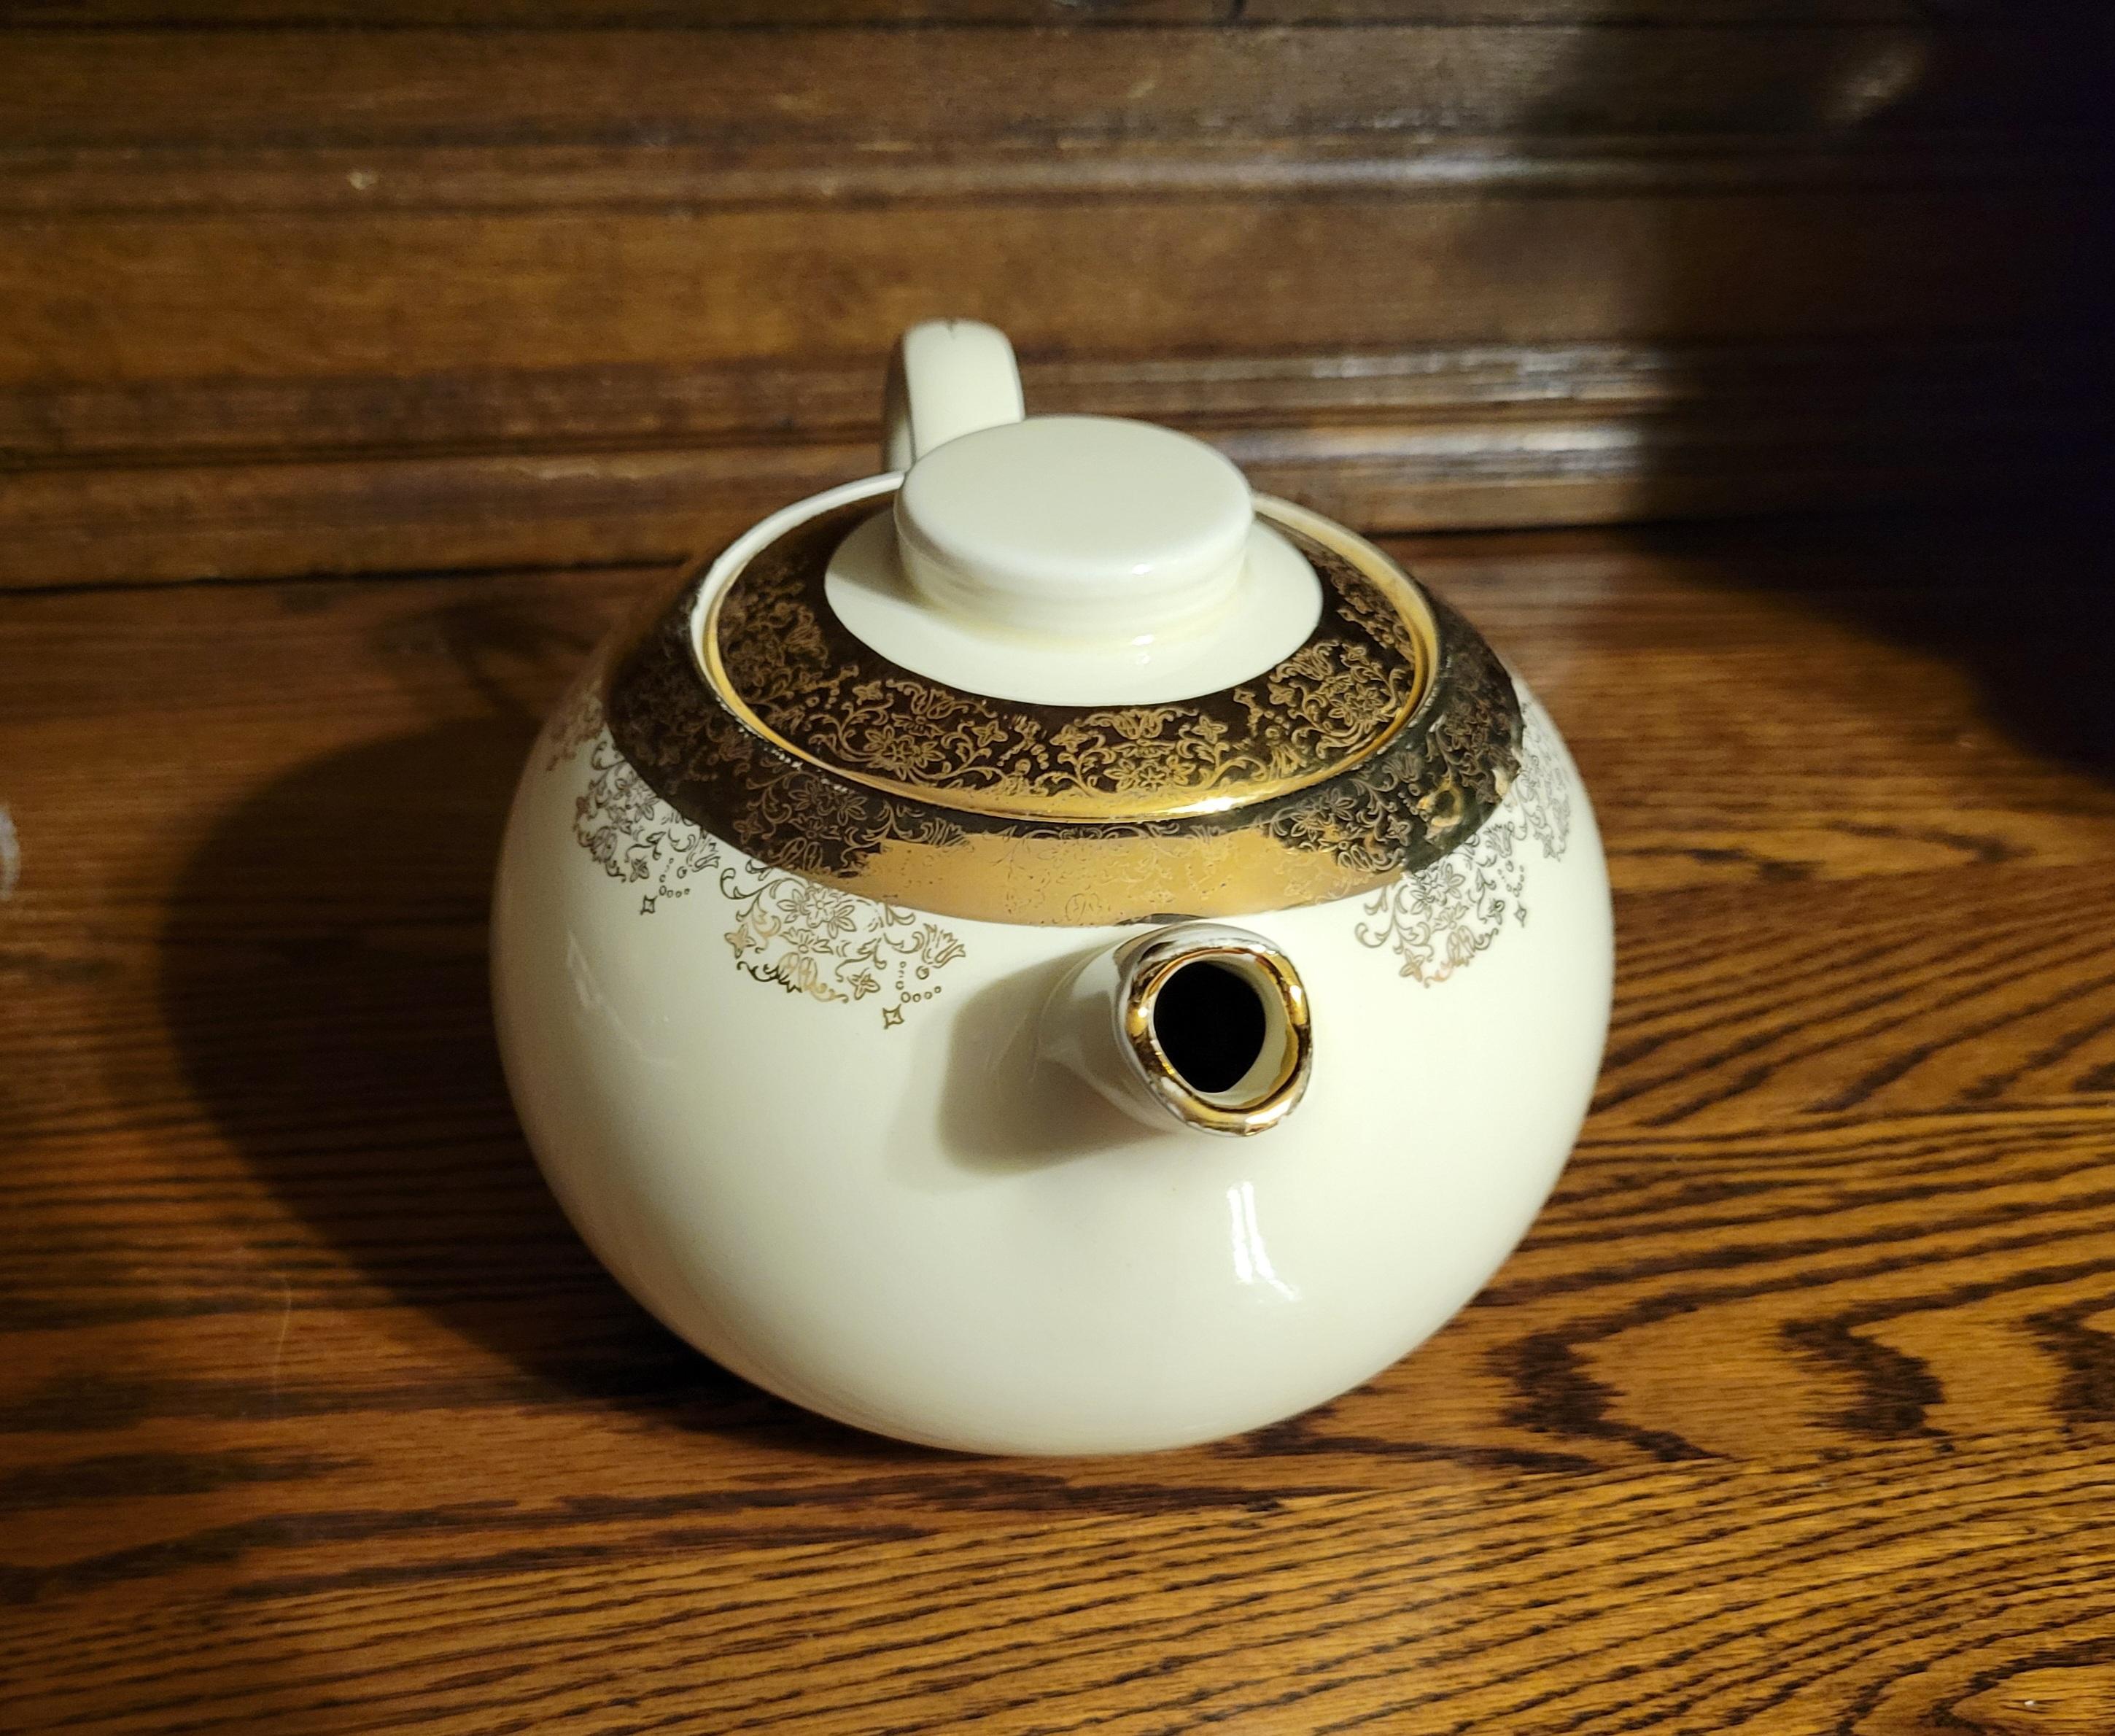 Rare vintage Sabin Crest-o-Gold warranted 22K teapot. The teapot holds about 36 Oz of liquid, has no cracks or chips. 